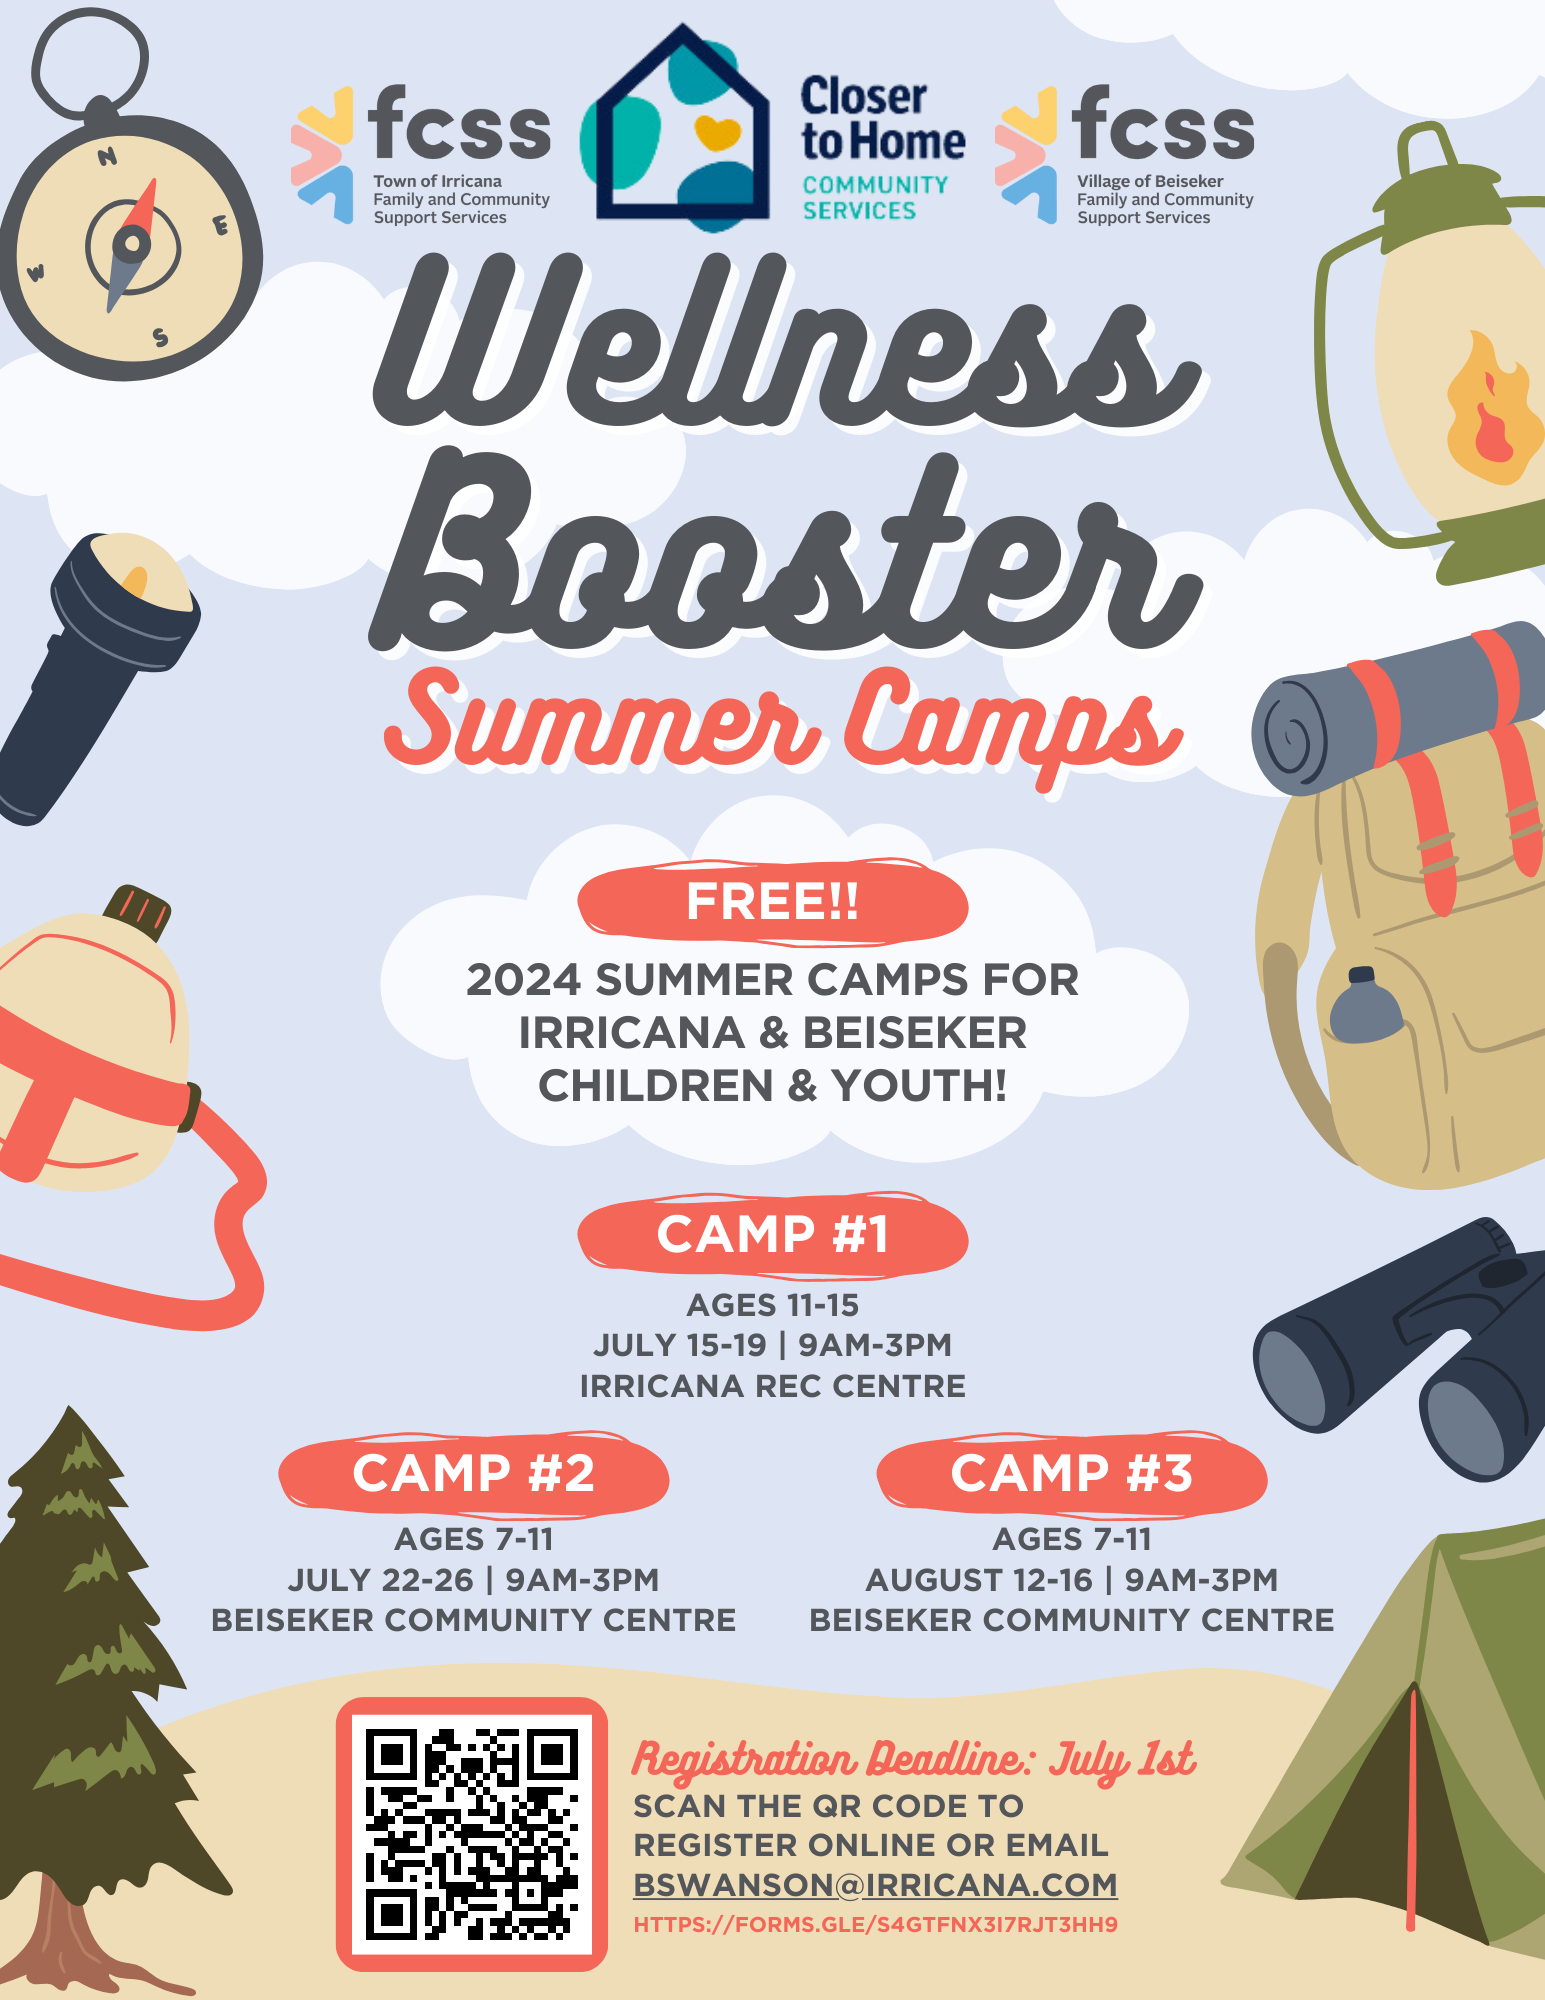 Irricana & Beiseker Wellness Booster Summer Camps hosted by Closer to Home Community Services 2024